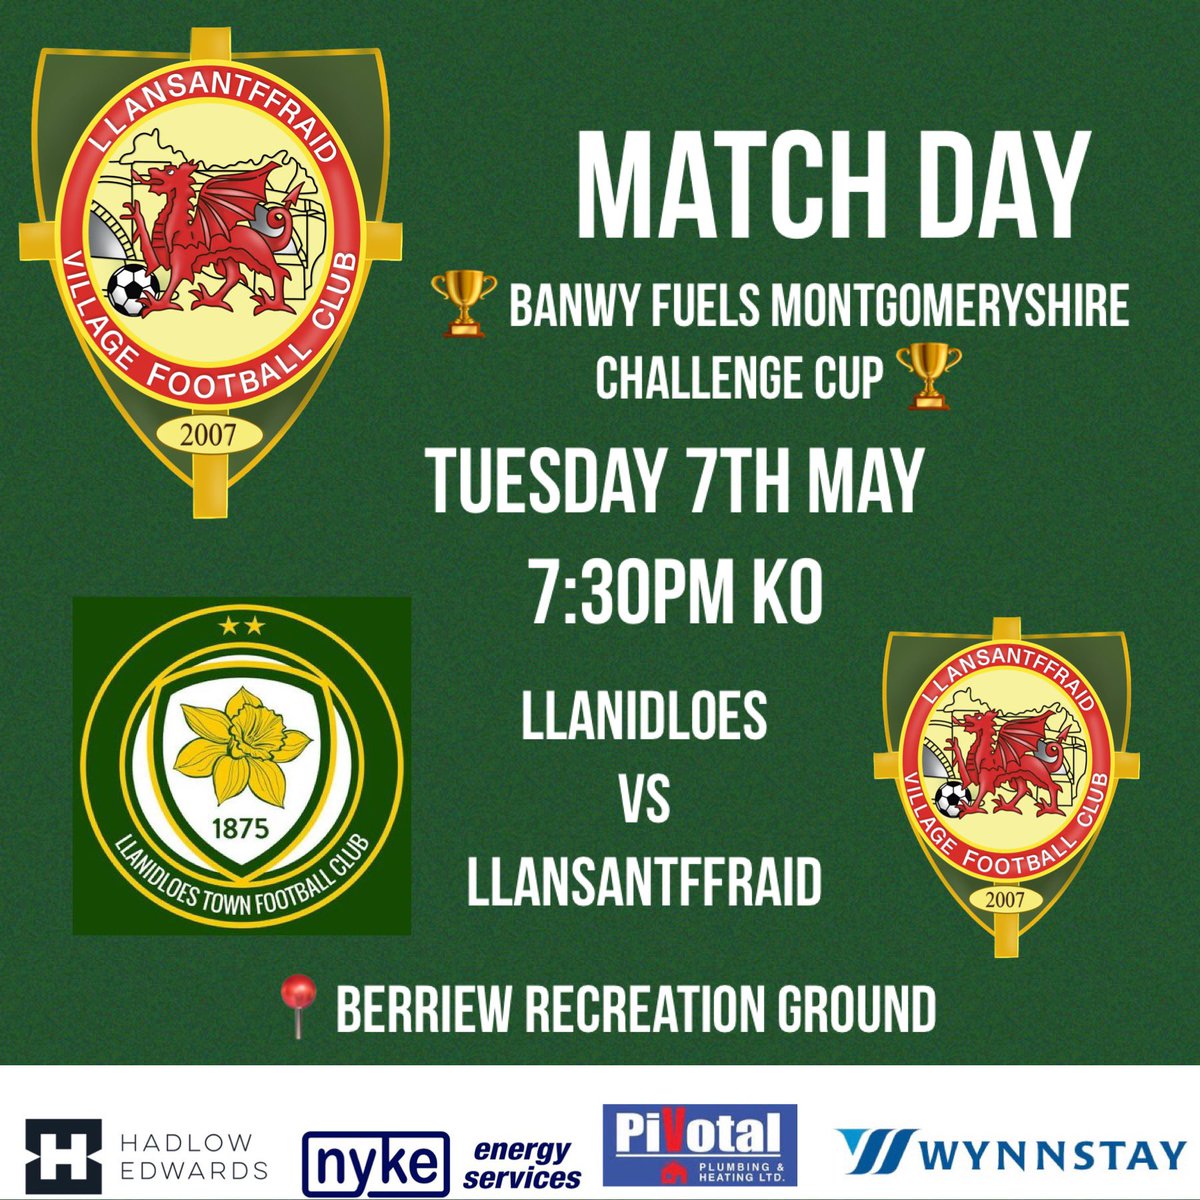 🟢⚽️ MATCH DAY ⚽️🟢
Llanidloes vs Llansantffraid
7:30pm KO
📍 Berriew Recreation Ground
Come along to support the lads in the semi-final of the Banwy Fuels Montgomeryshire Challenge Cup 🏆💪🏼
@llanitownfc
@WynnstayAgri
@PivotalPlumbing 
@NykeEnergy
@macronwrexham